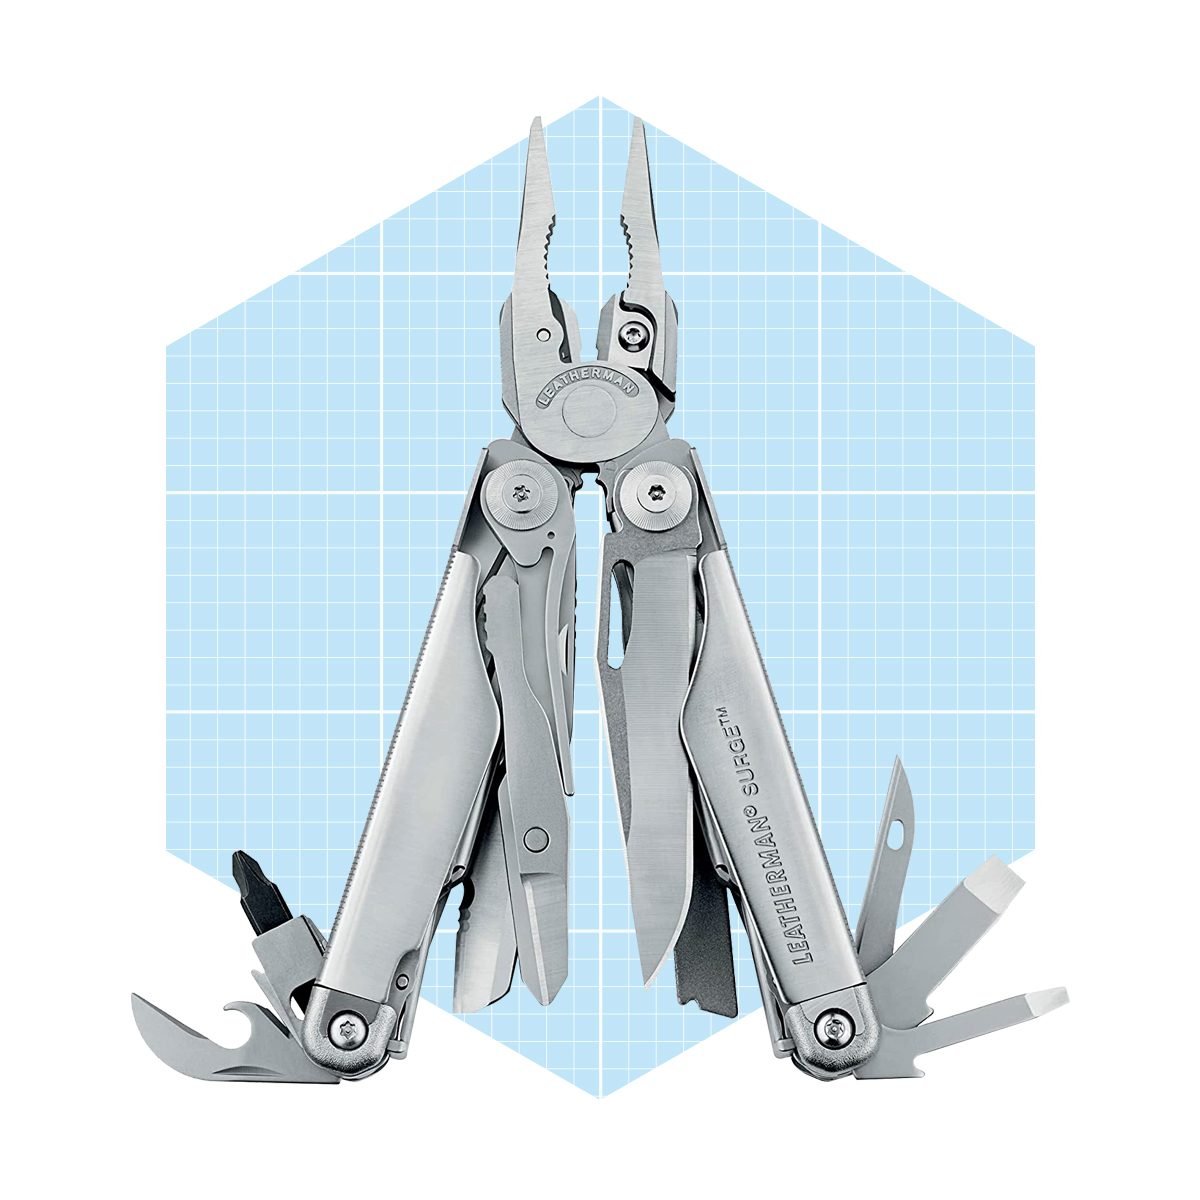 Leatherman, Surge Heavy Duty Multitool With Premium Replaceable Wire Cutters And Spring Action Scissors Ecomm Amazon.com